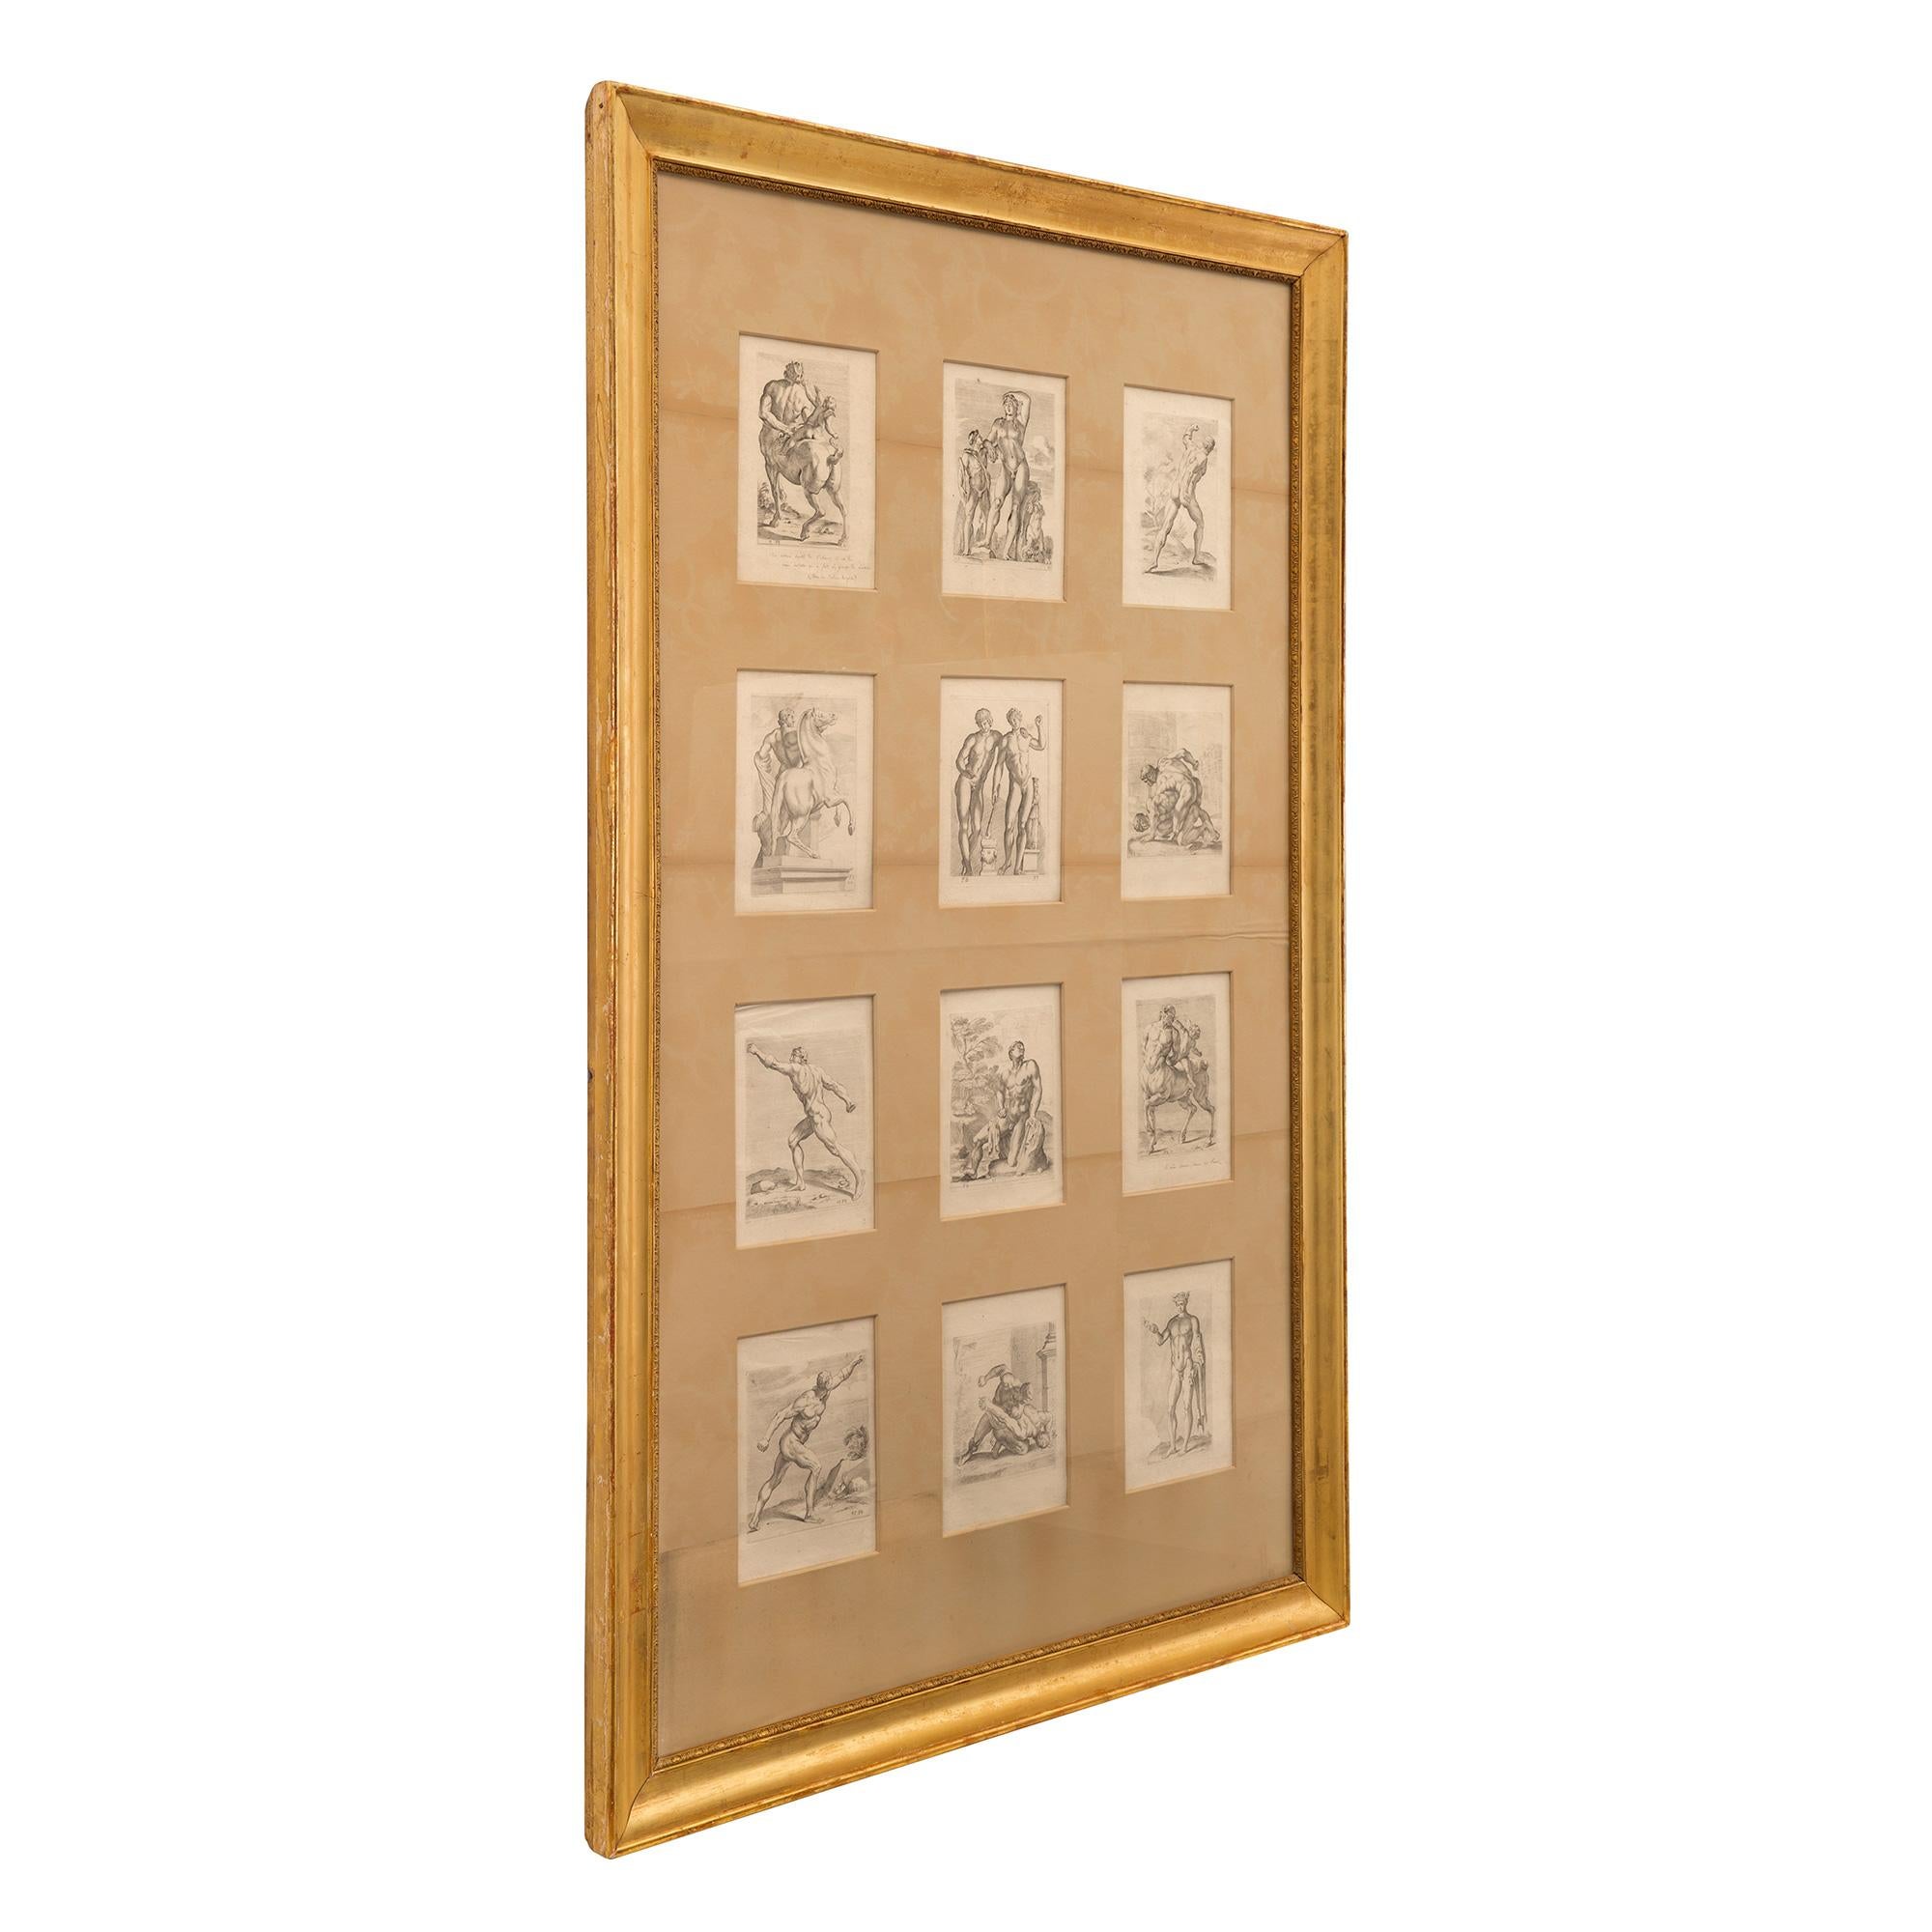 An elegant and most decorative set of twelve Italian 19th century Neo-Classical prints set in a giltwood frame. Each beautiful print displays wonderfully executed Greek and Neo-Classical figures. The prints depict wrestlers, Olympians and elegant